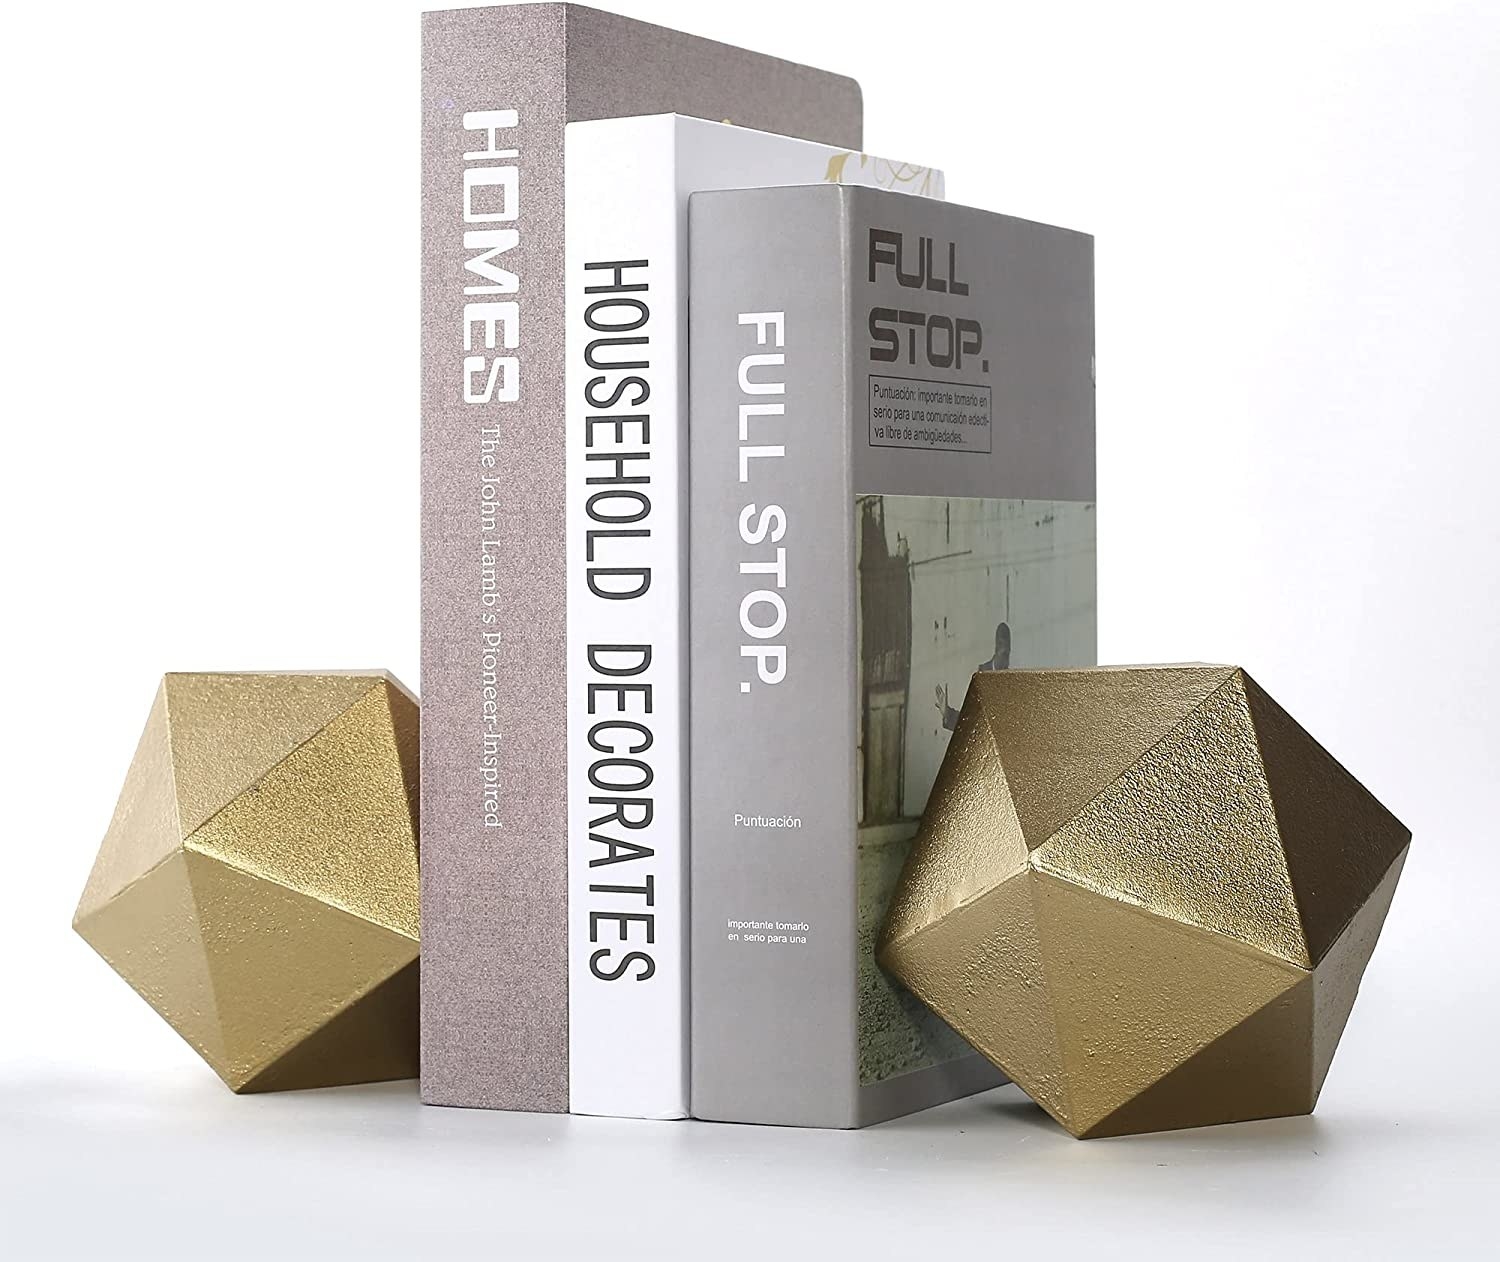 The gold geometric bookends are shown holding three books together